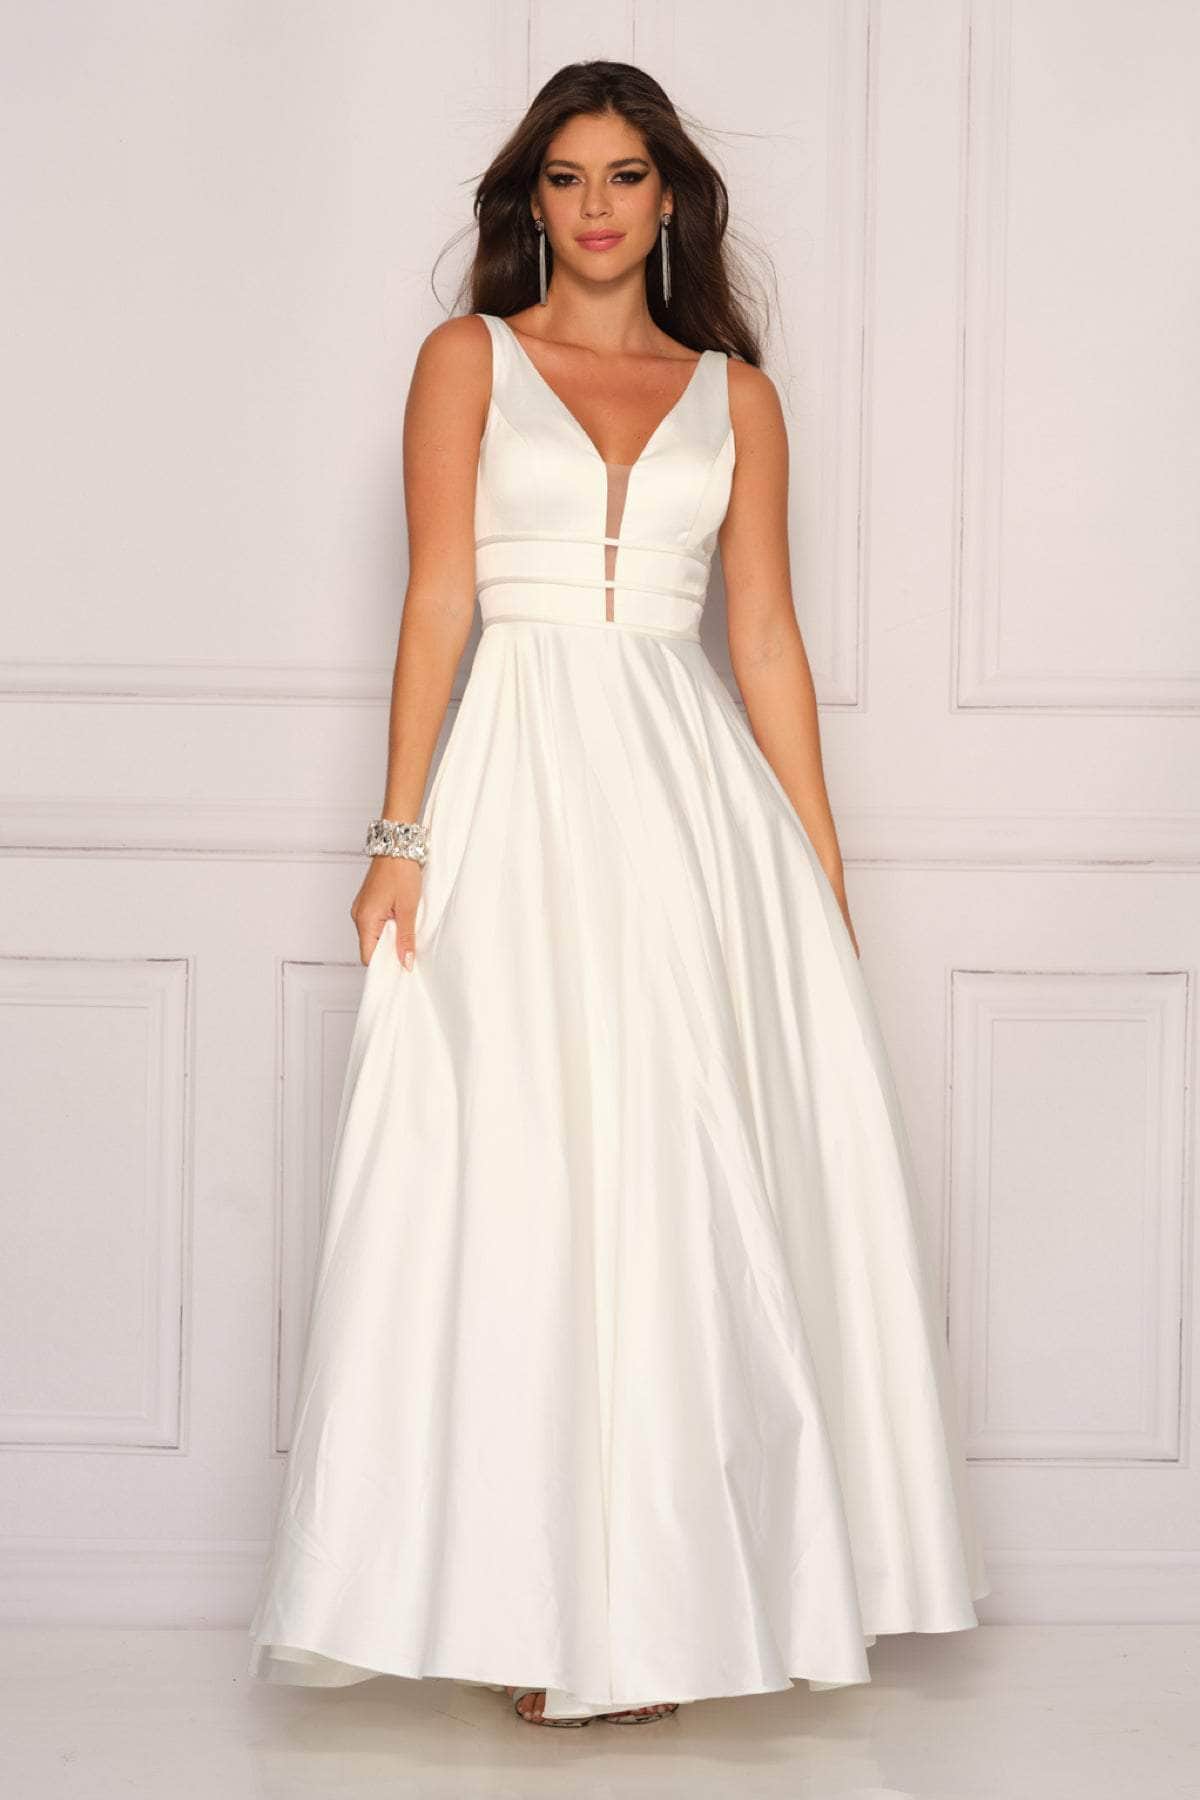 Image of Dave & Johnny 10971 - Sleeveless A-Line Bridal Gown